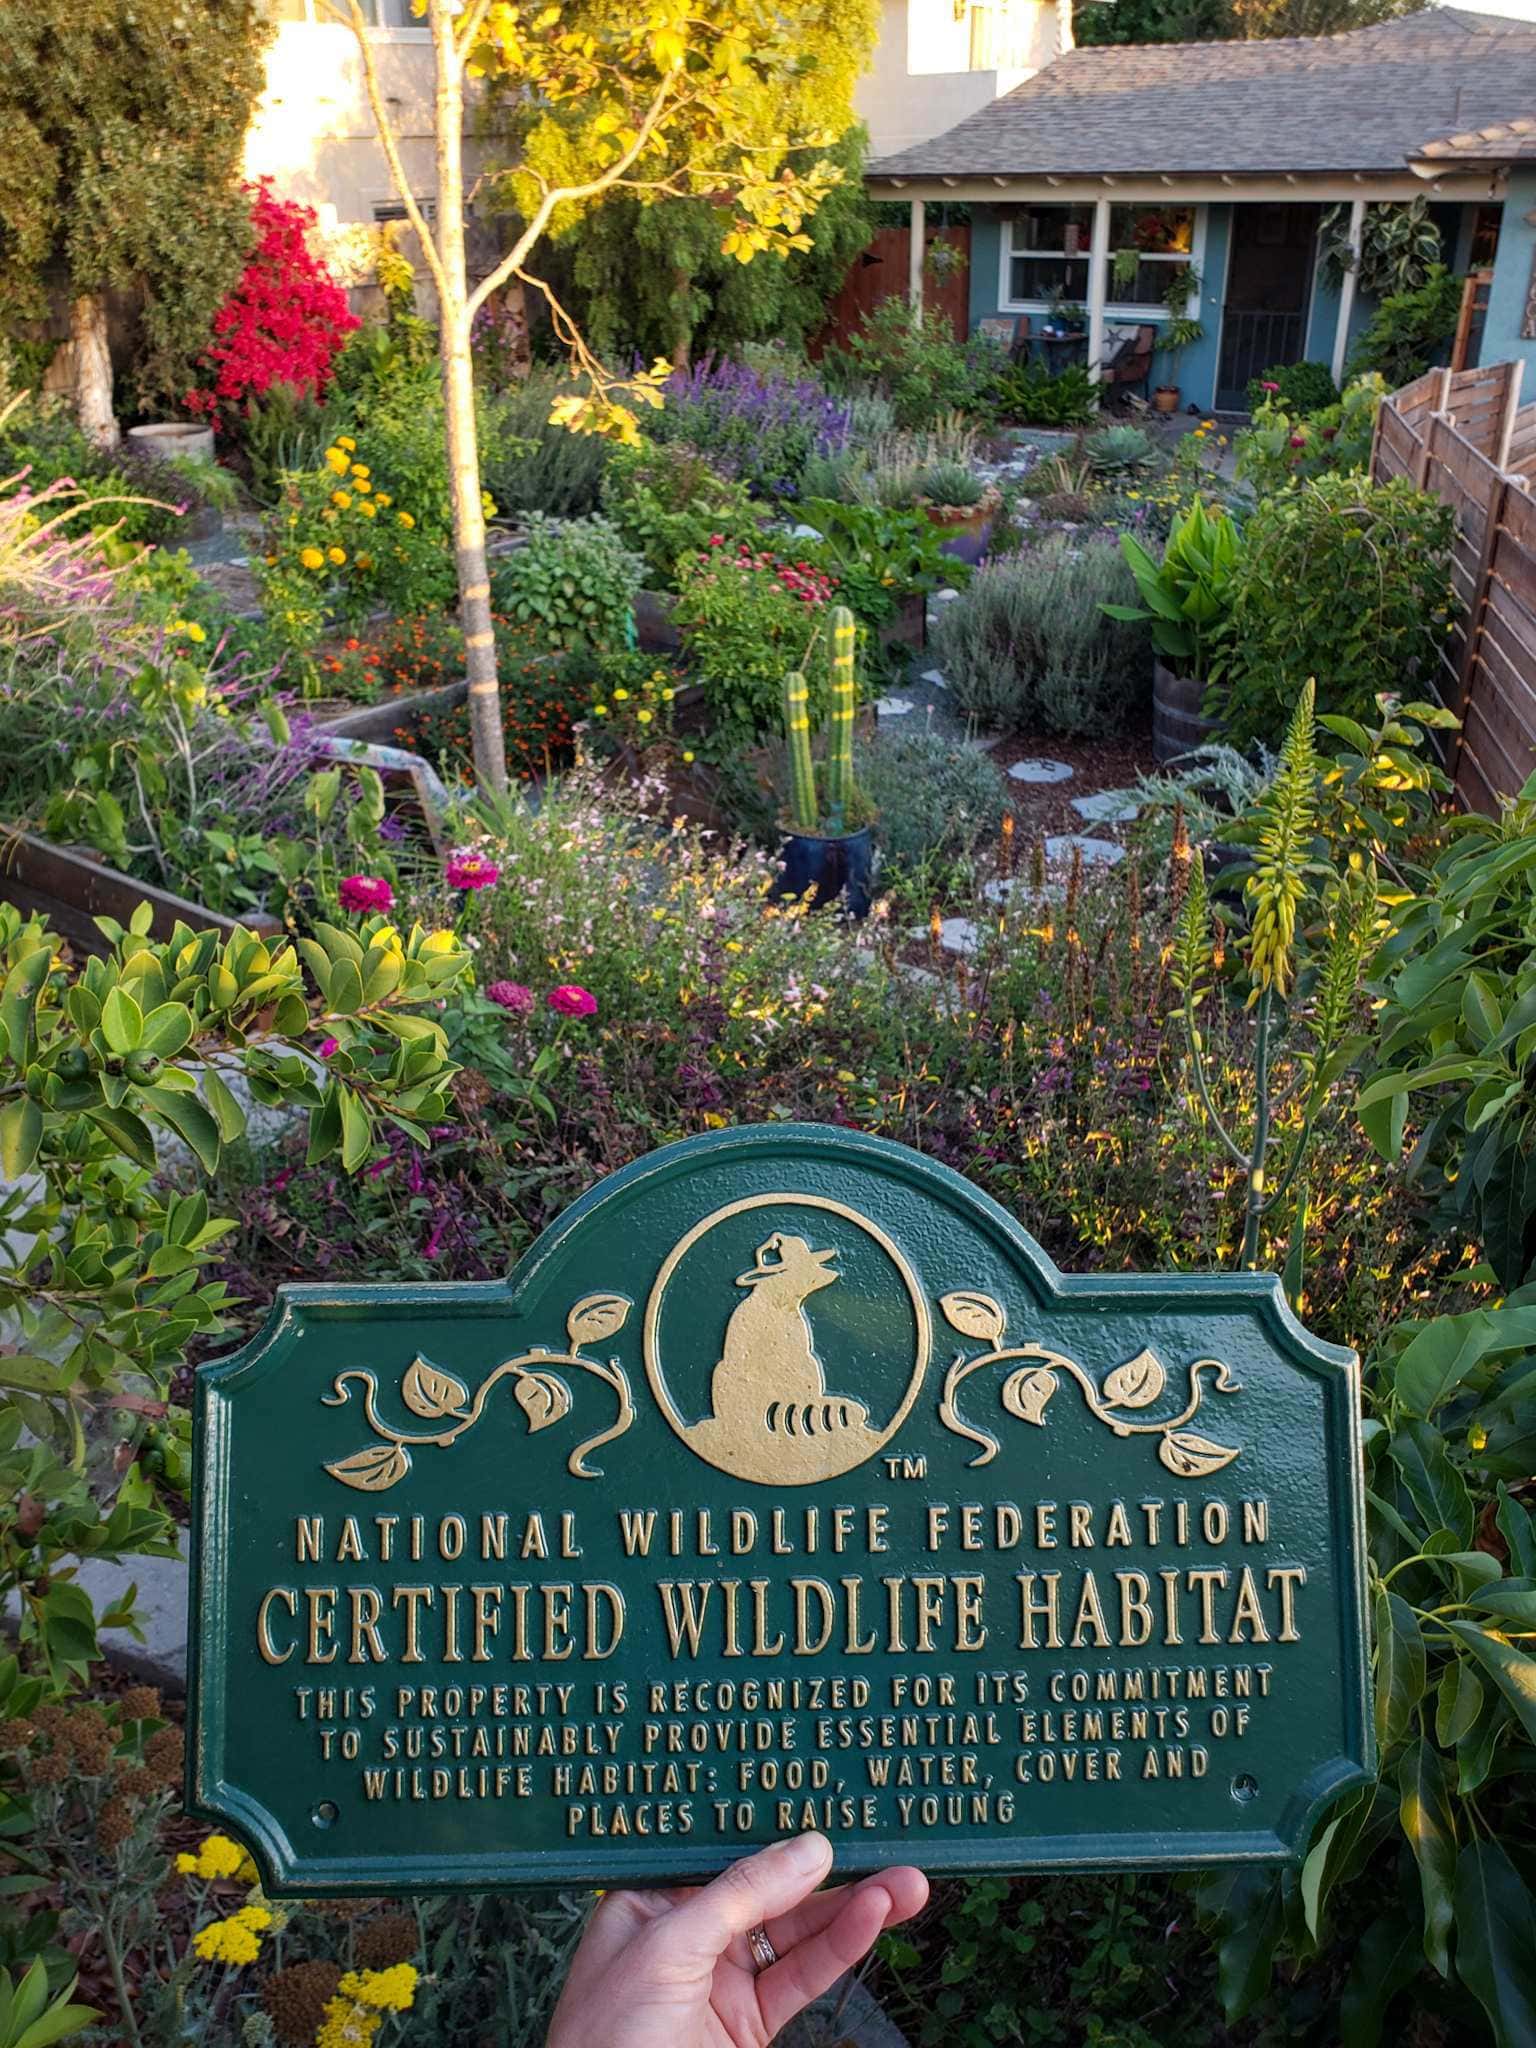 A hand is holding a National Wildlife Federation Certified Wildlife Habitat plaque in front of a view of the front yard garden. There isn't a lot of open space with many plants for pollinators, raised beds for vegetables, shrubs, and trees spaced throughout the area.  